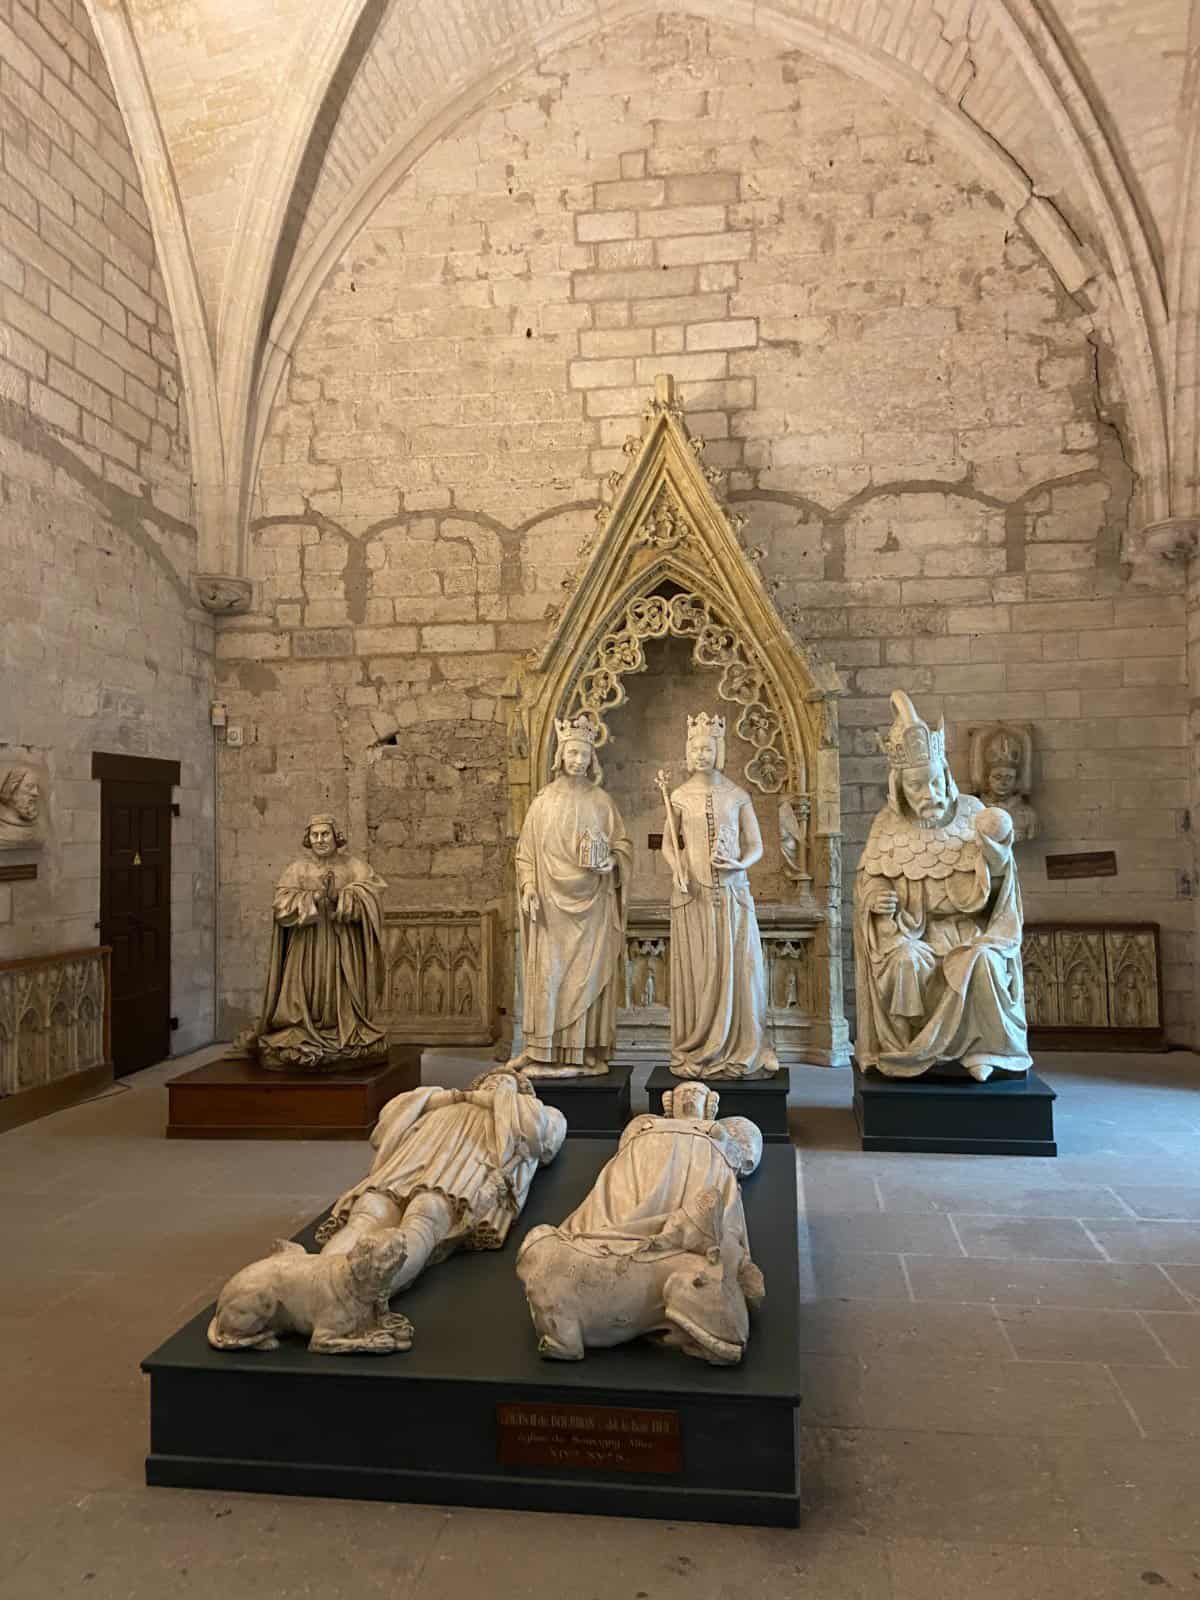 Statues and tombs inside the Palais des Papes, Avignon, France